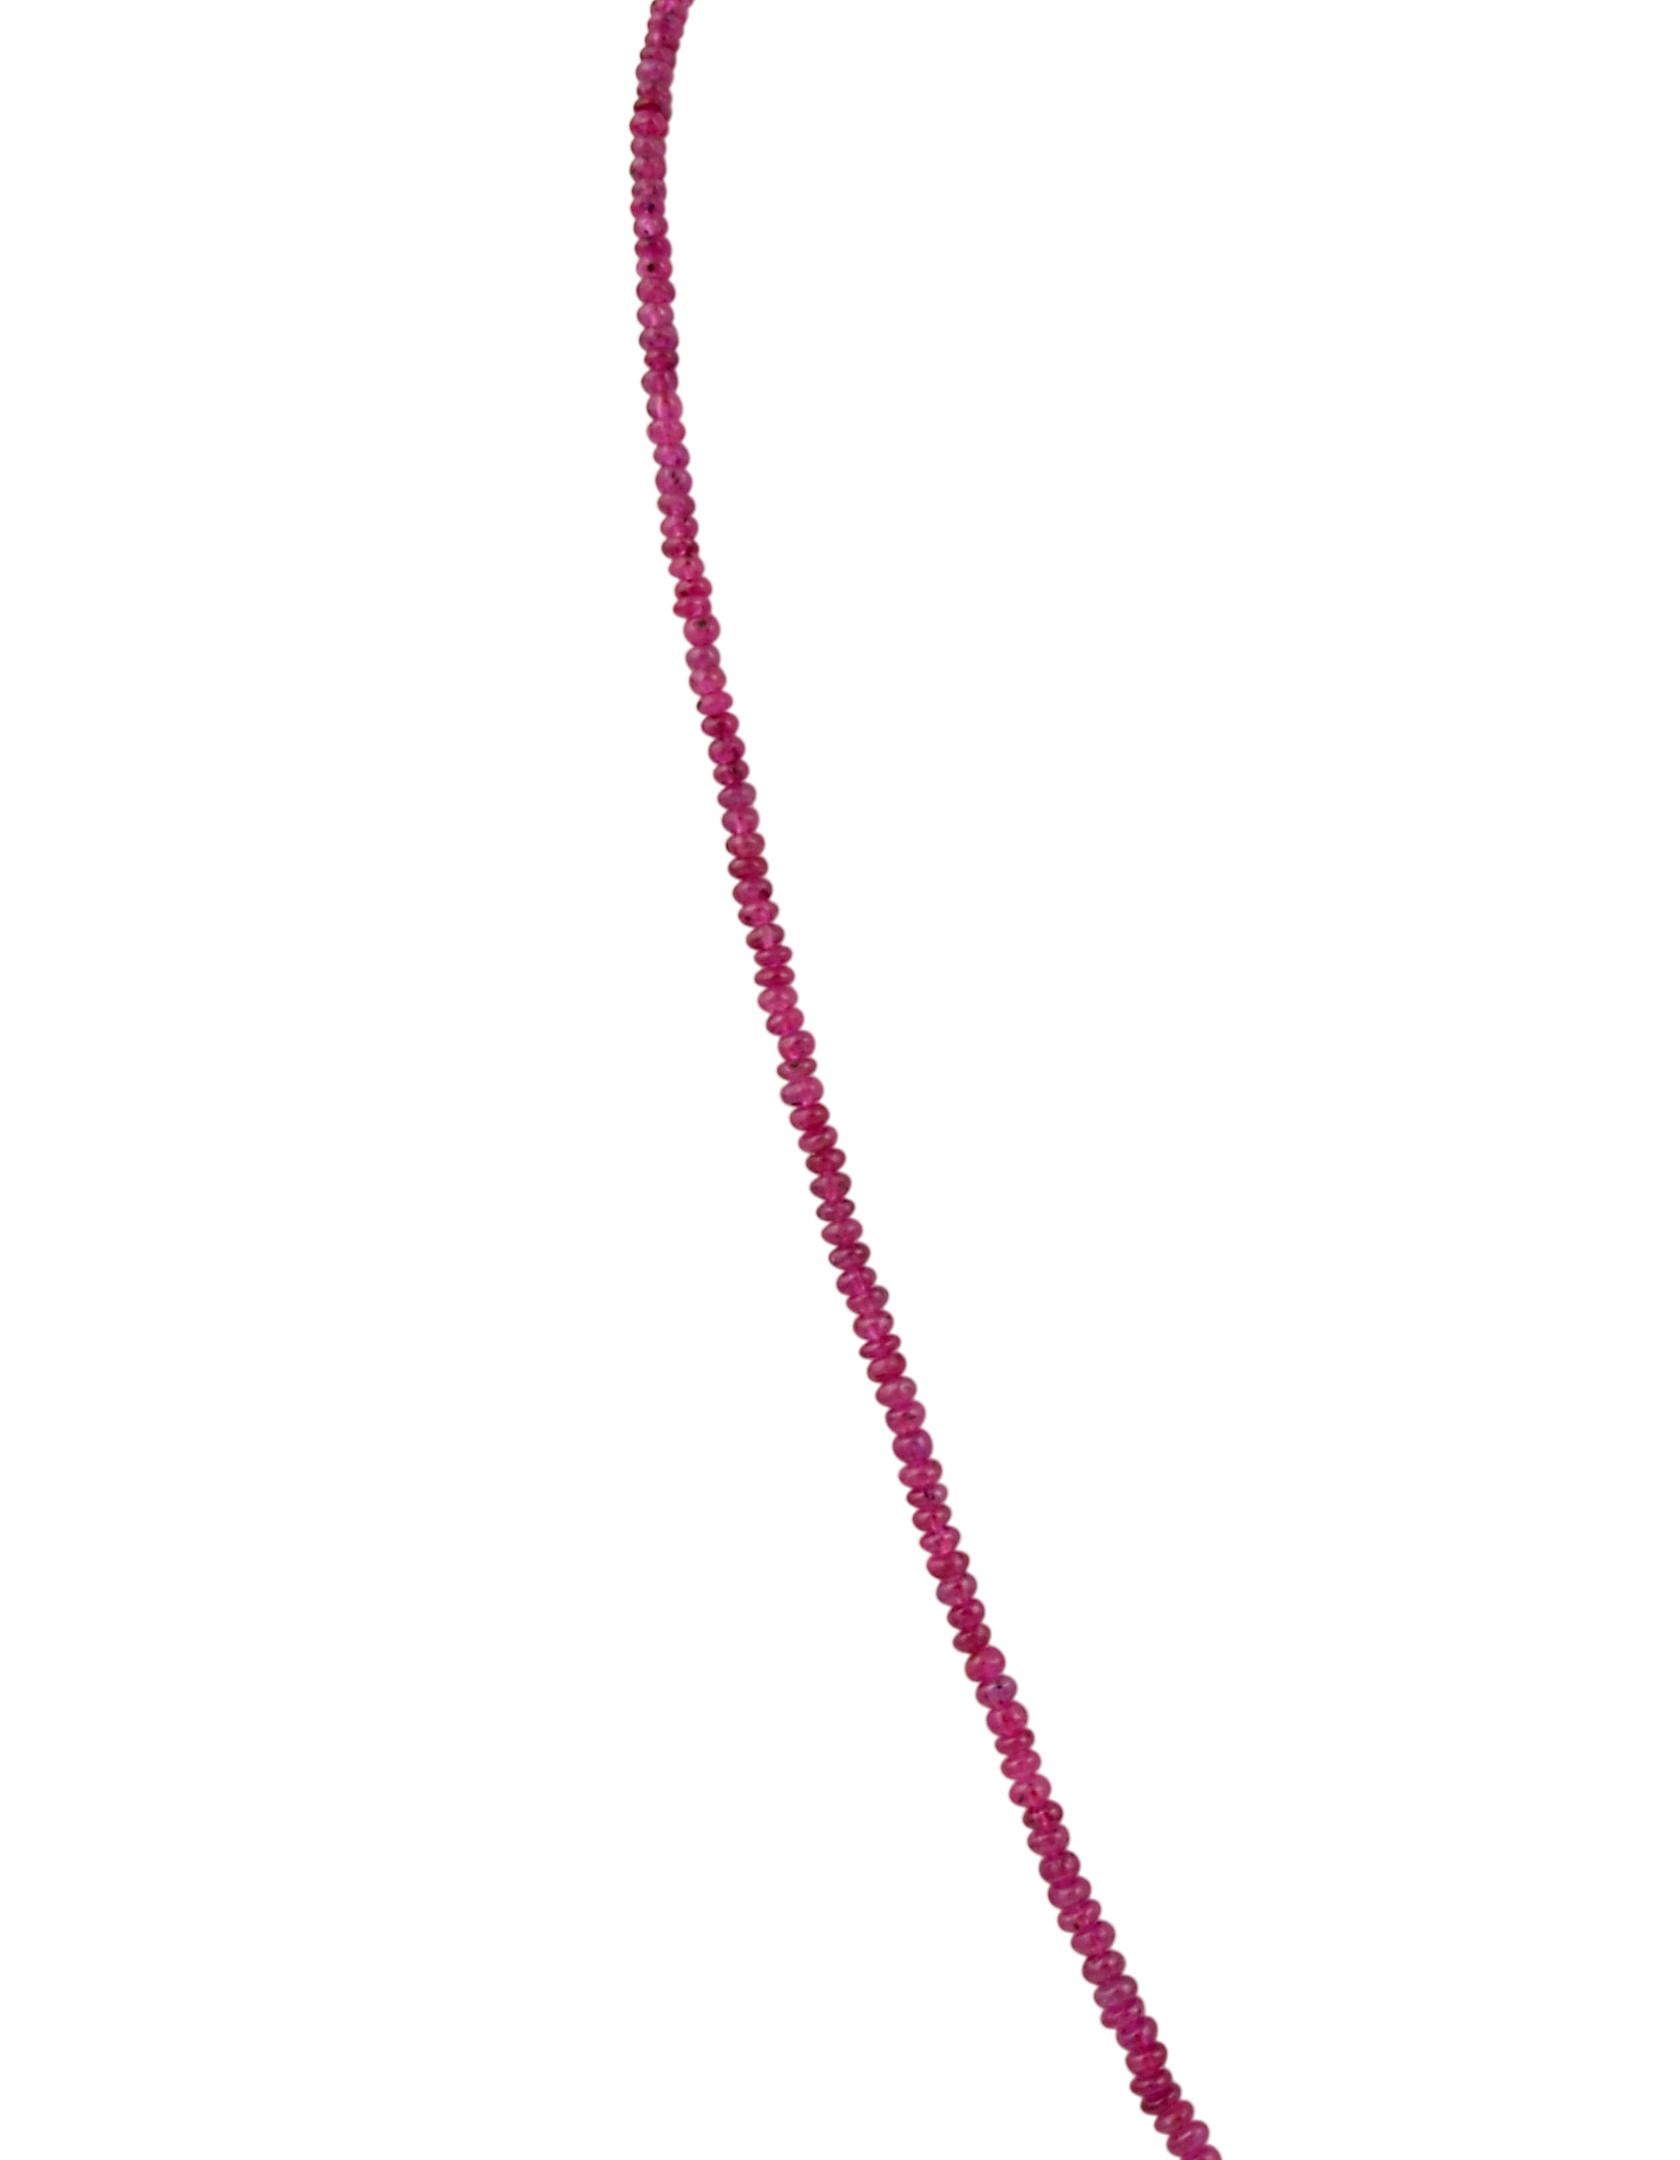 Natural  100 Ct Natural Ruby Bead Single Strand Necklace with Silver Clasp
27